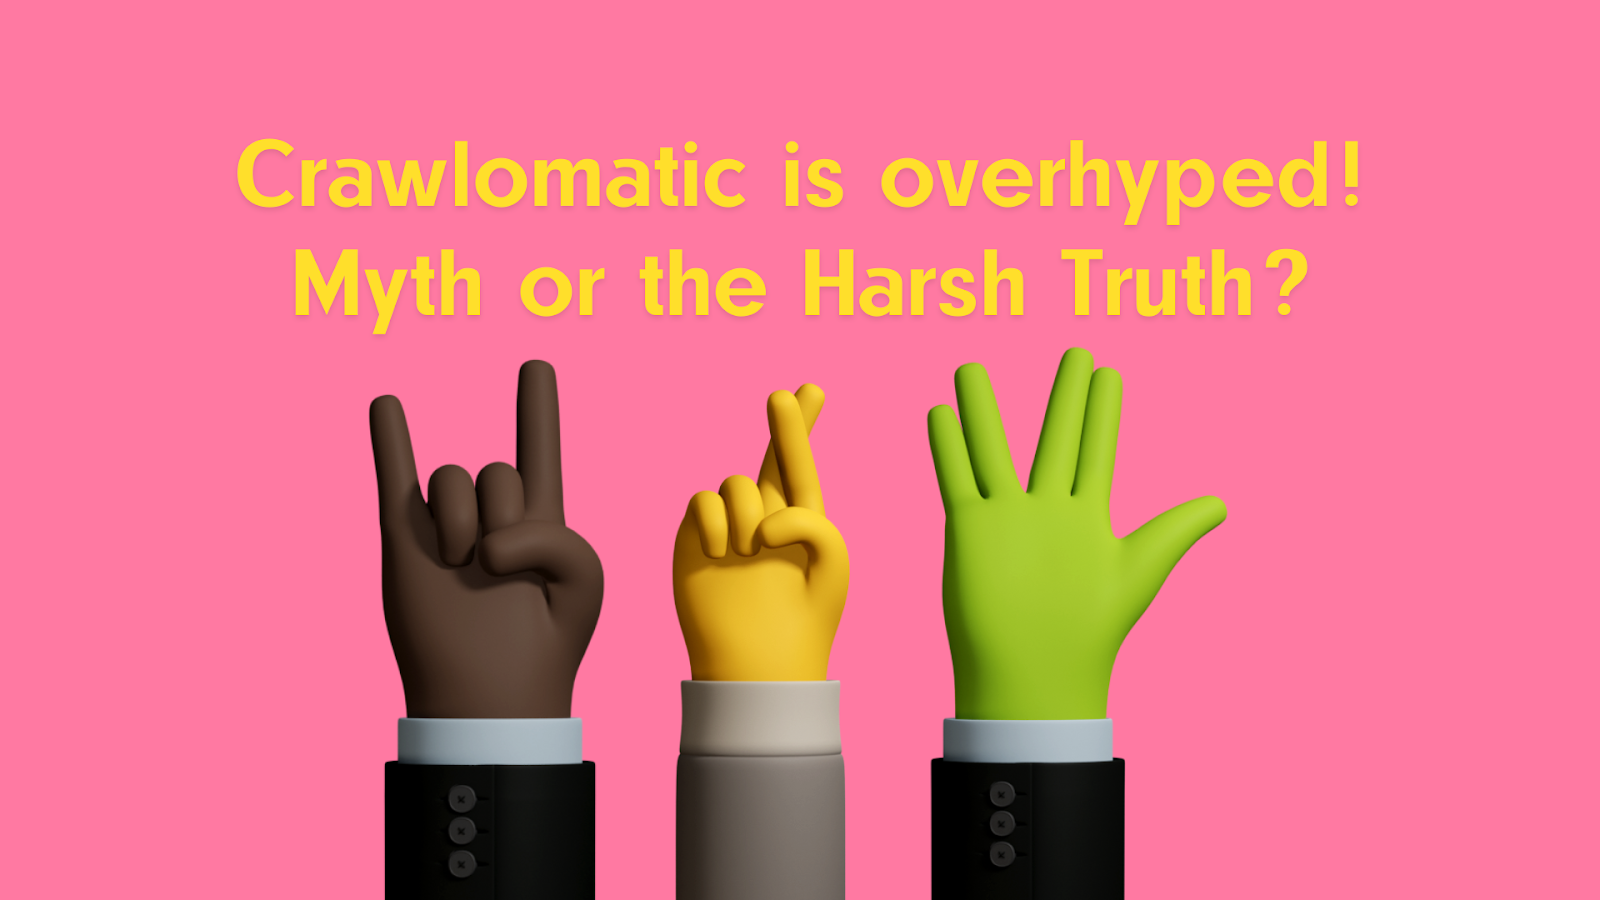 crawlomatic-is-overhypes-myth-or-the-harsh-truth-article.jpg